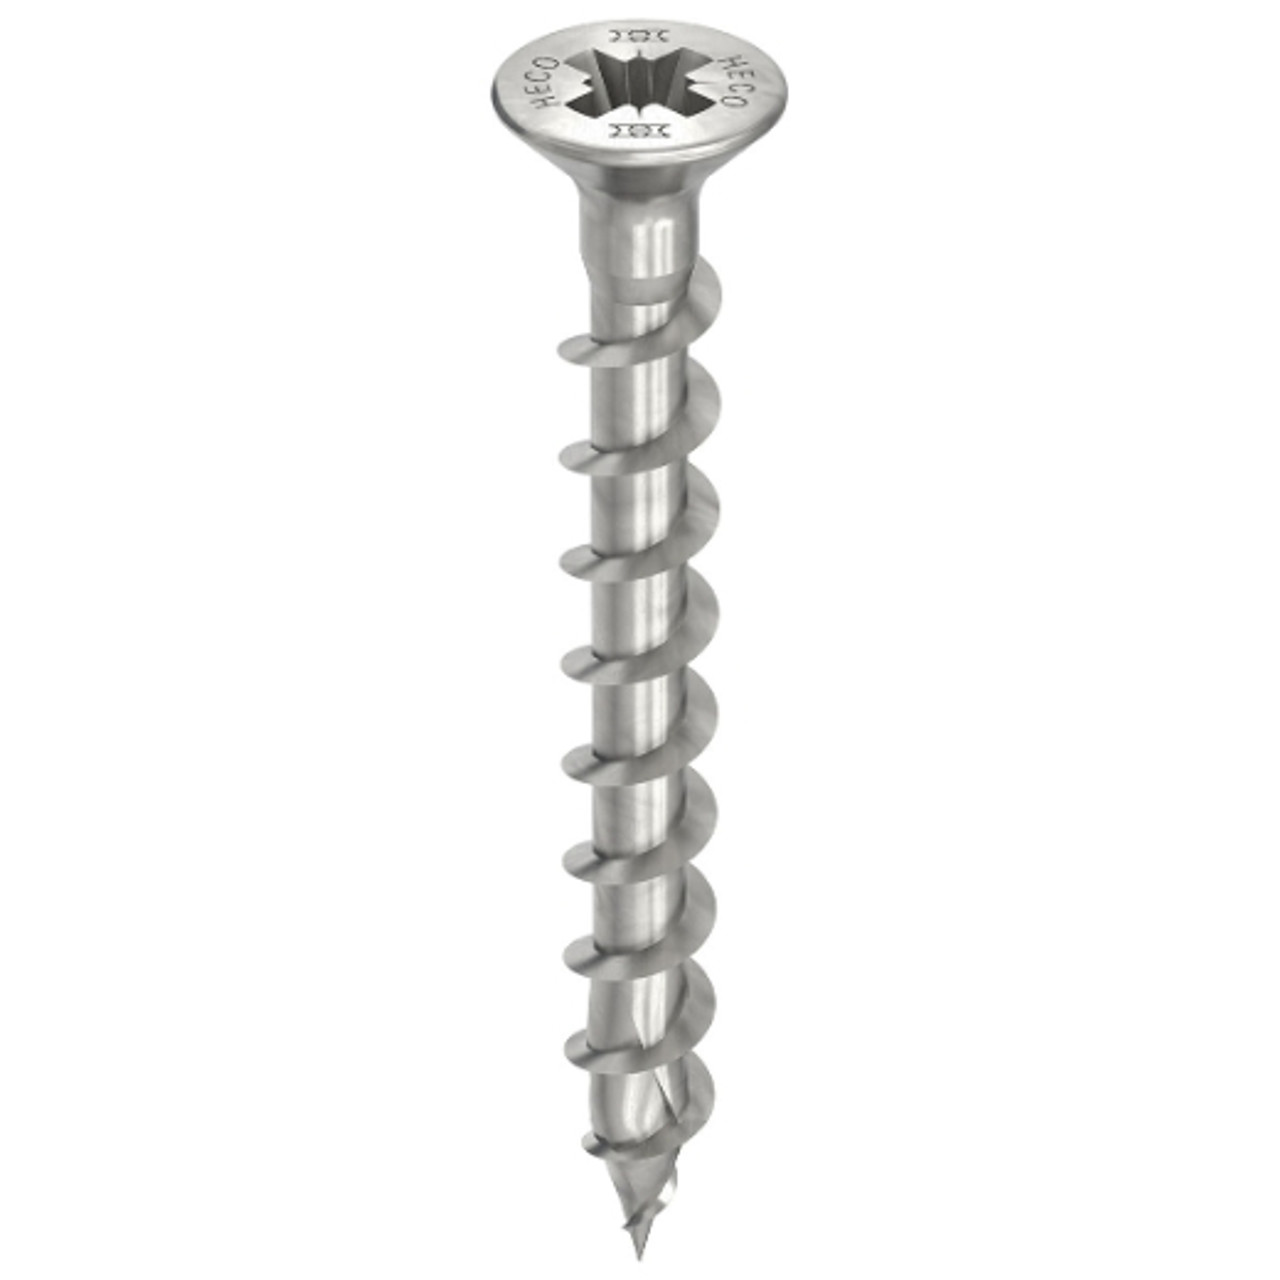 HECO Fitting A2 304 Stainless Steel Countersunk Head Screws | Countersunk Head Screws for Cabinet and Furniture Makers, Cabinetry Screws in Sydney and Brisbane.